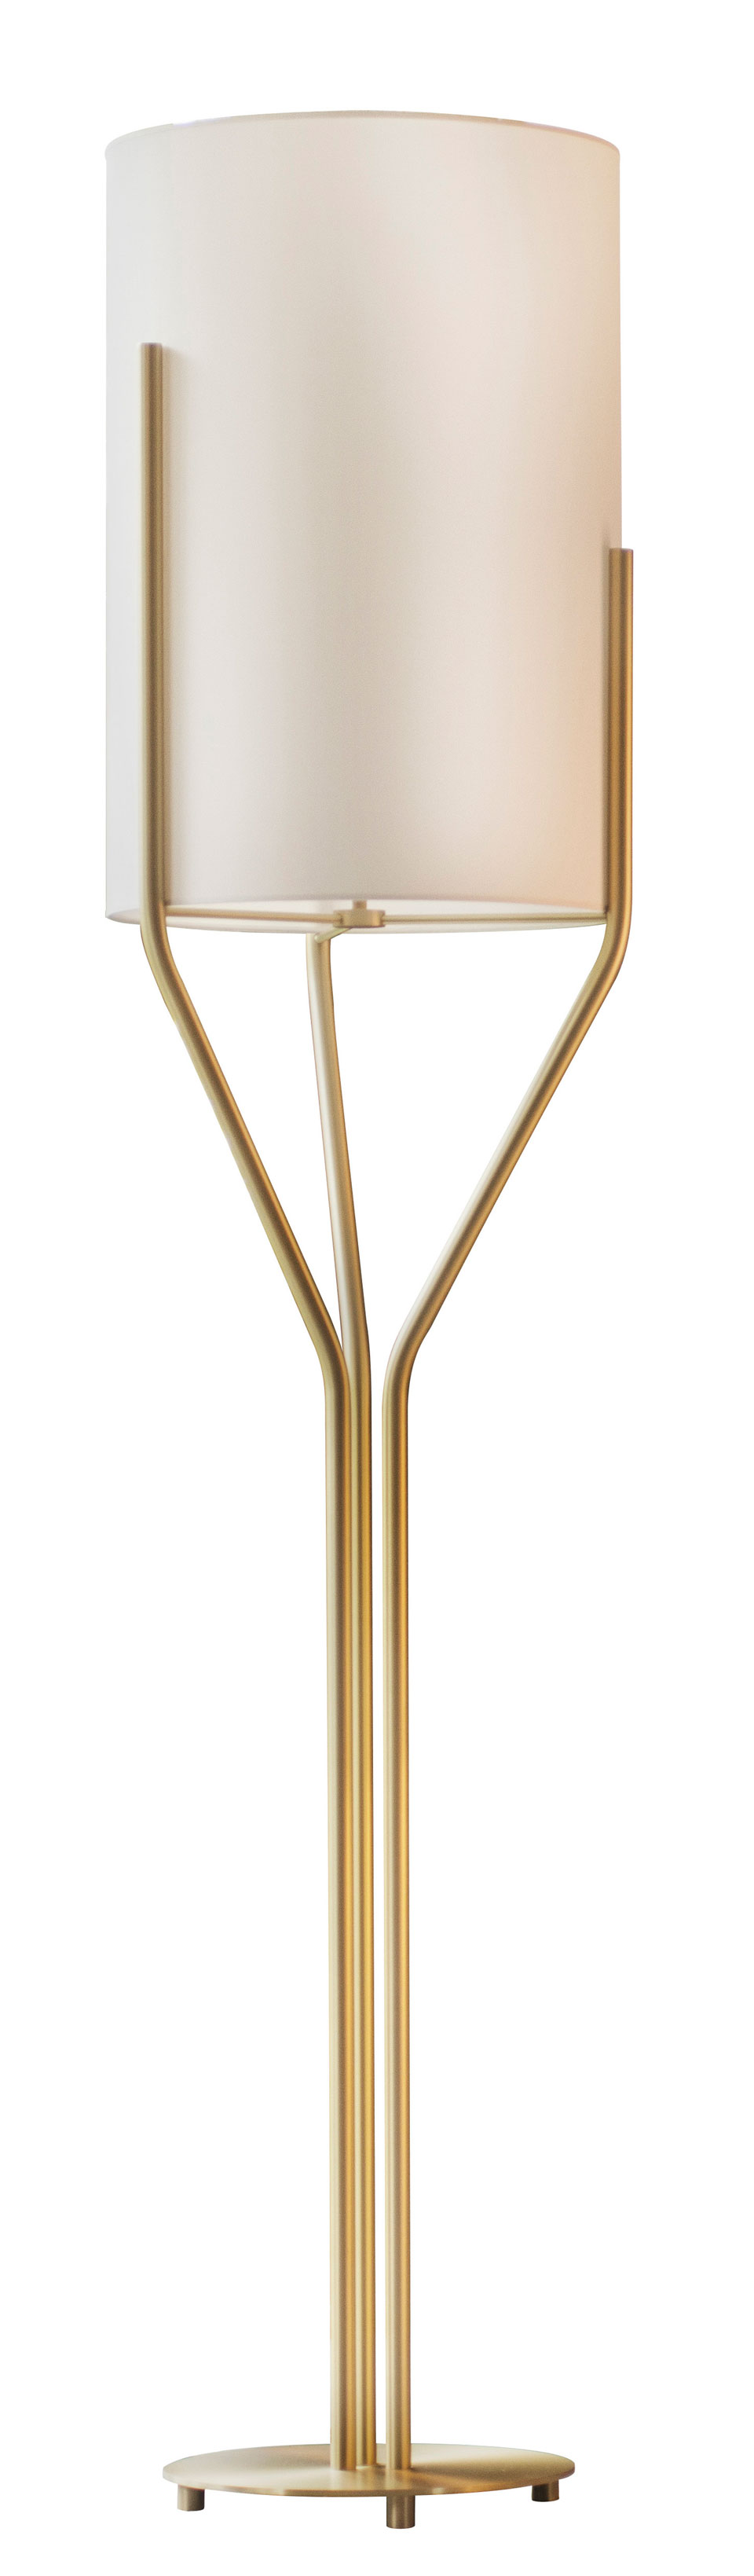 Arborescence Floor Lamp S Golden Stems, Matching Brass Floor And Table Lamps